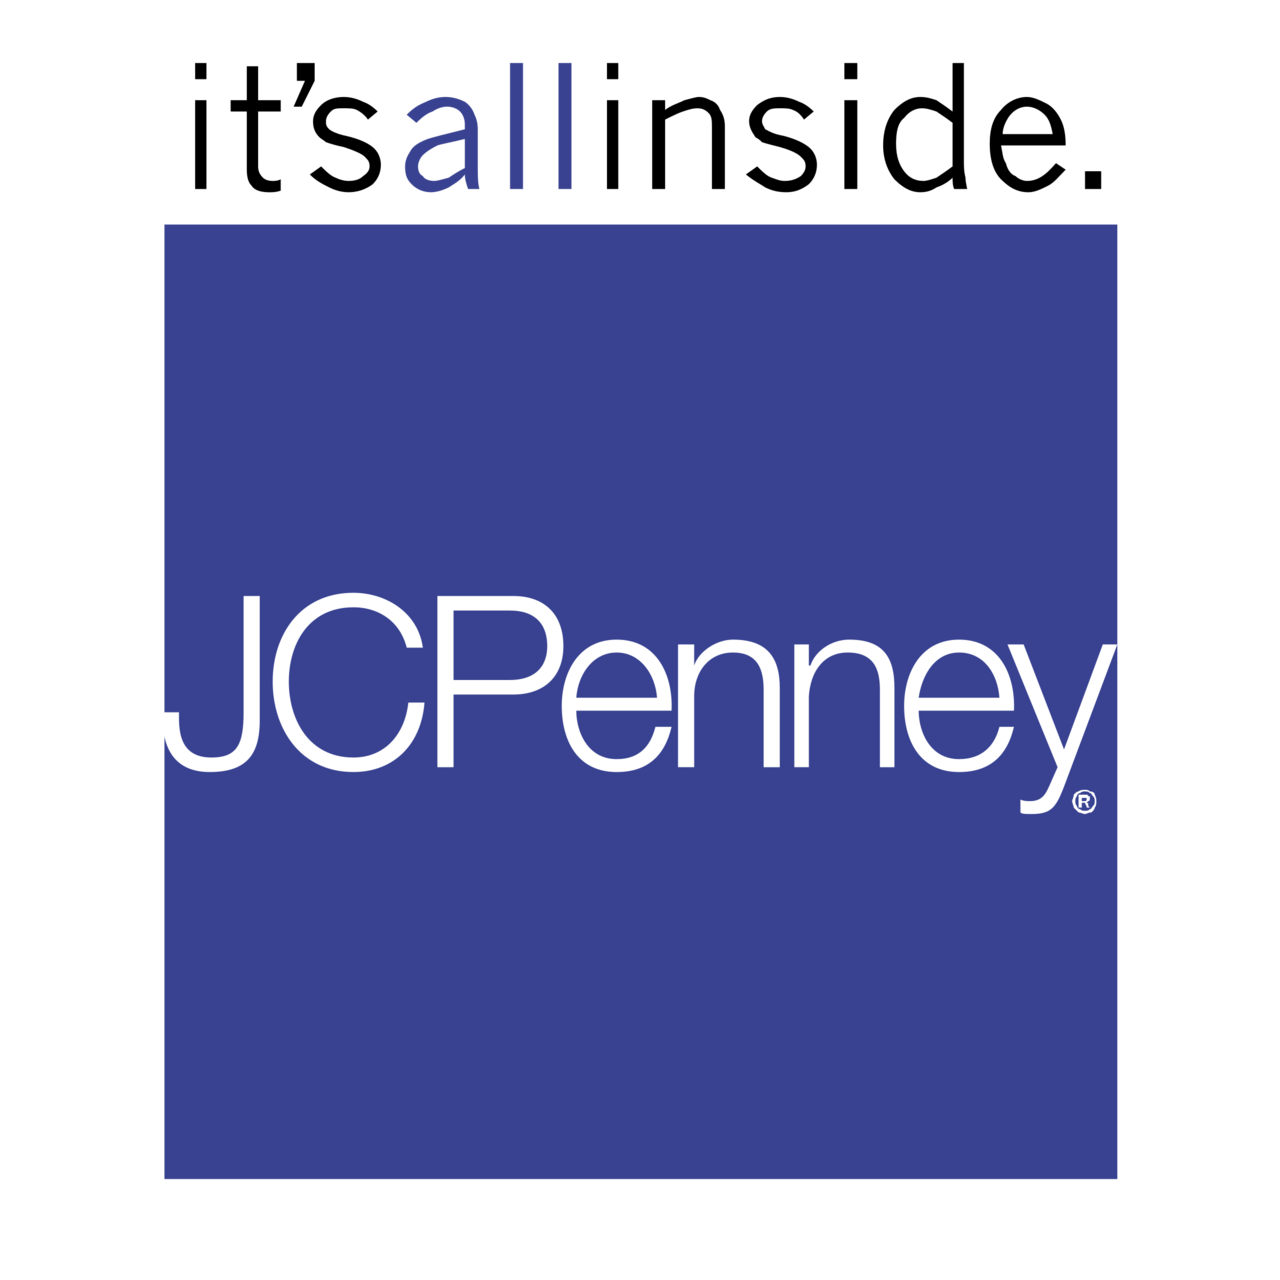 Download JCPenney Logo PNG and Vector (PDF, SVG, Ai, EPS) Free